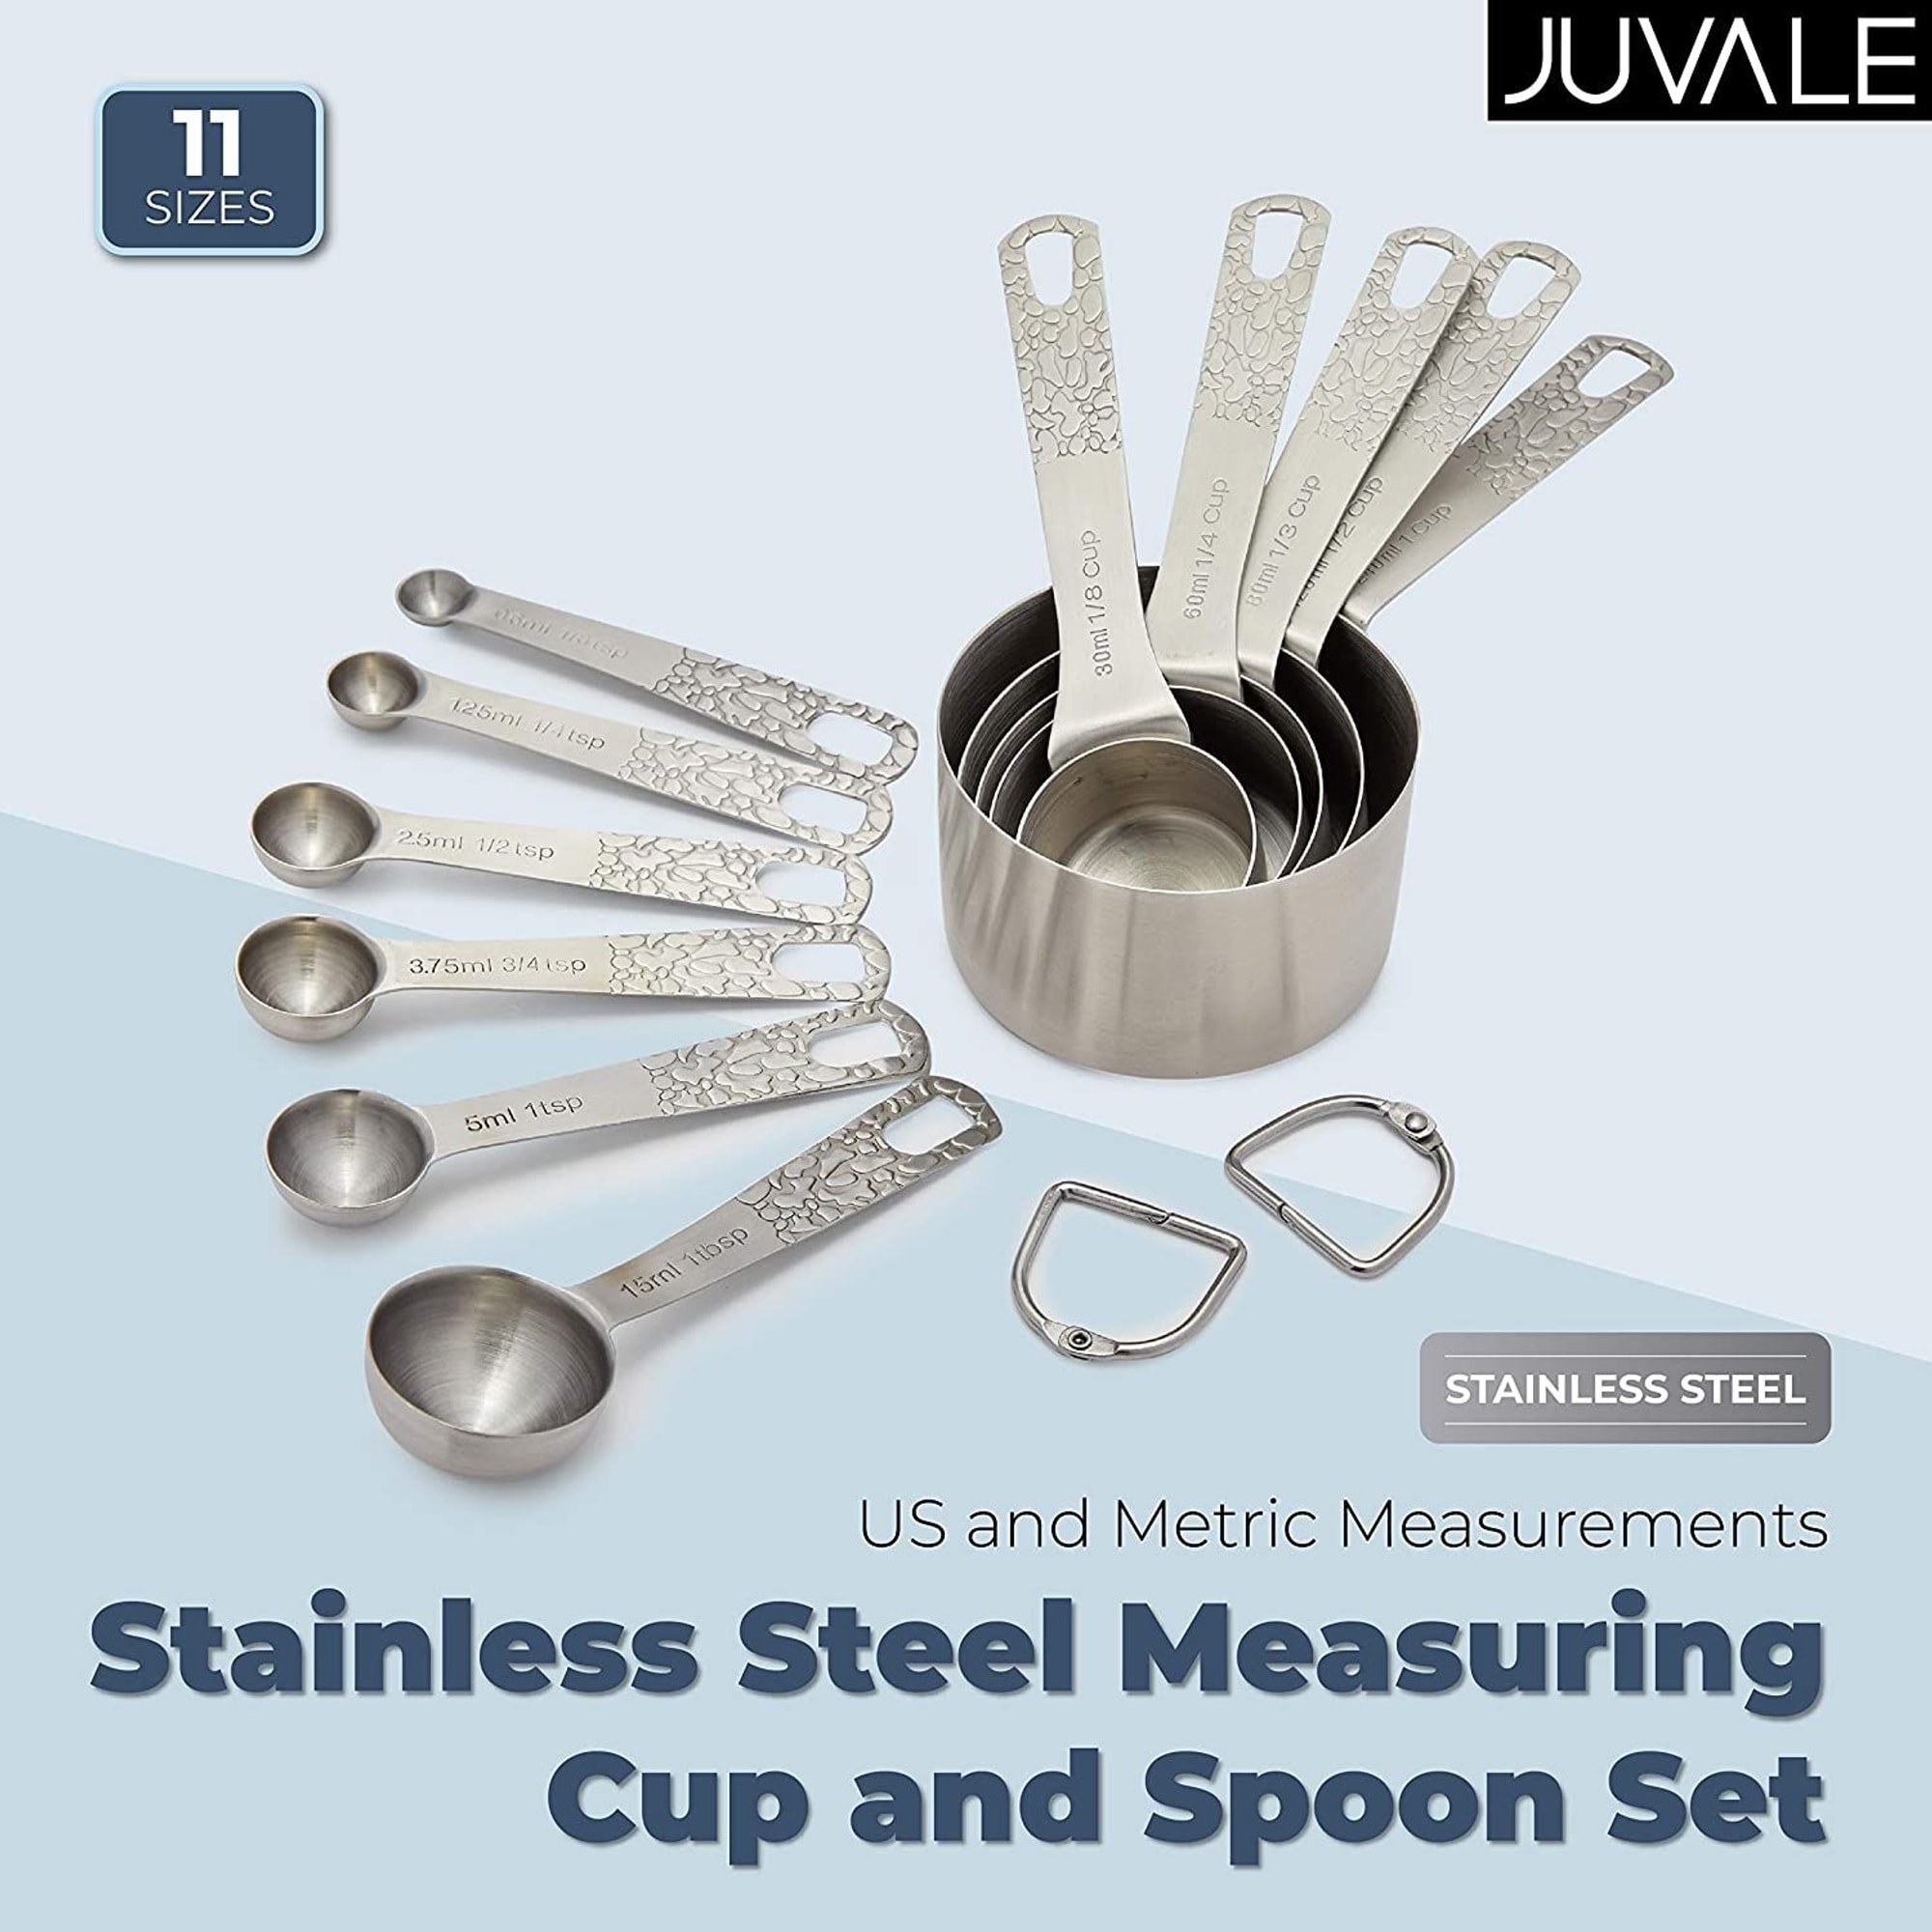 Measuring Cups and Spoons - Bed Bath & Beyond